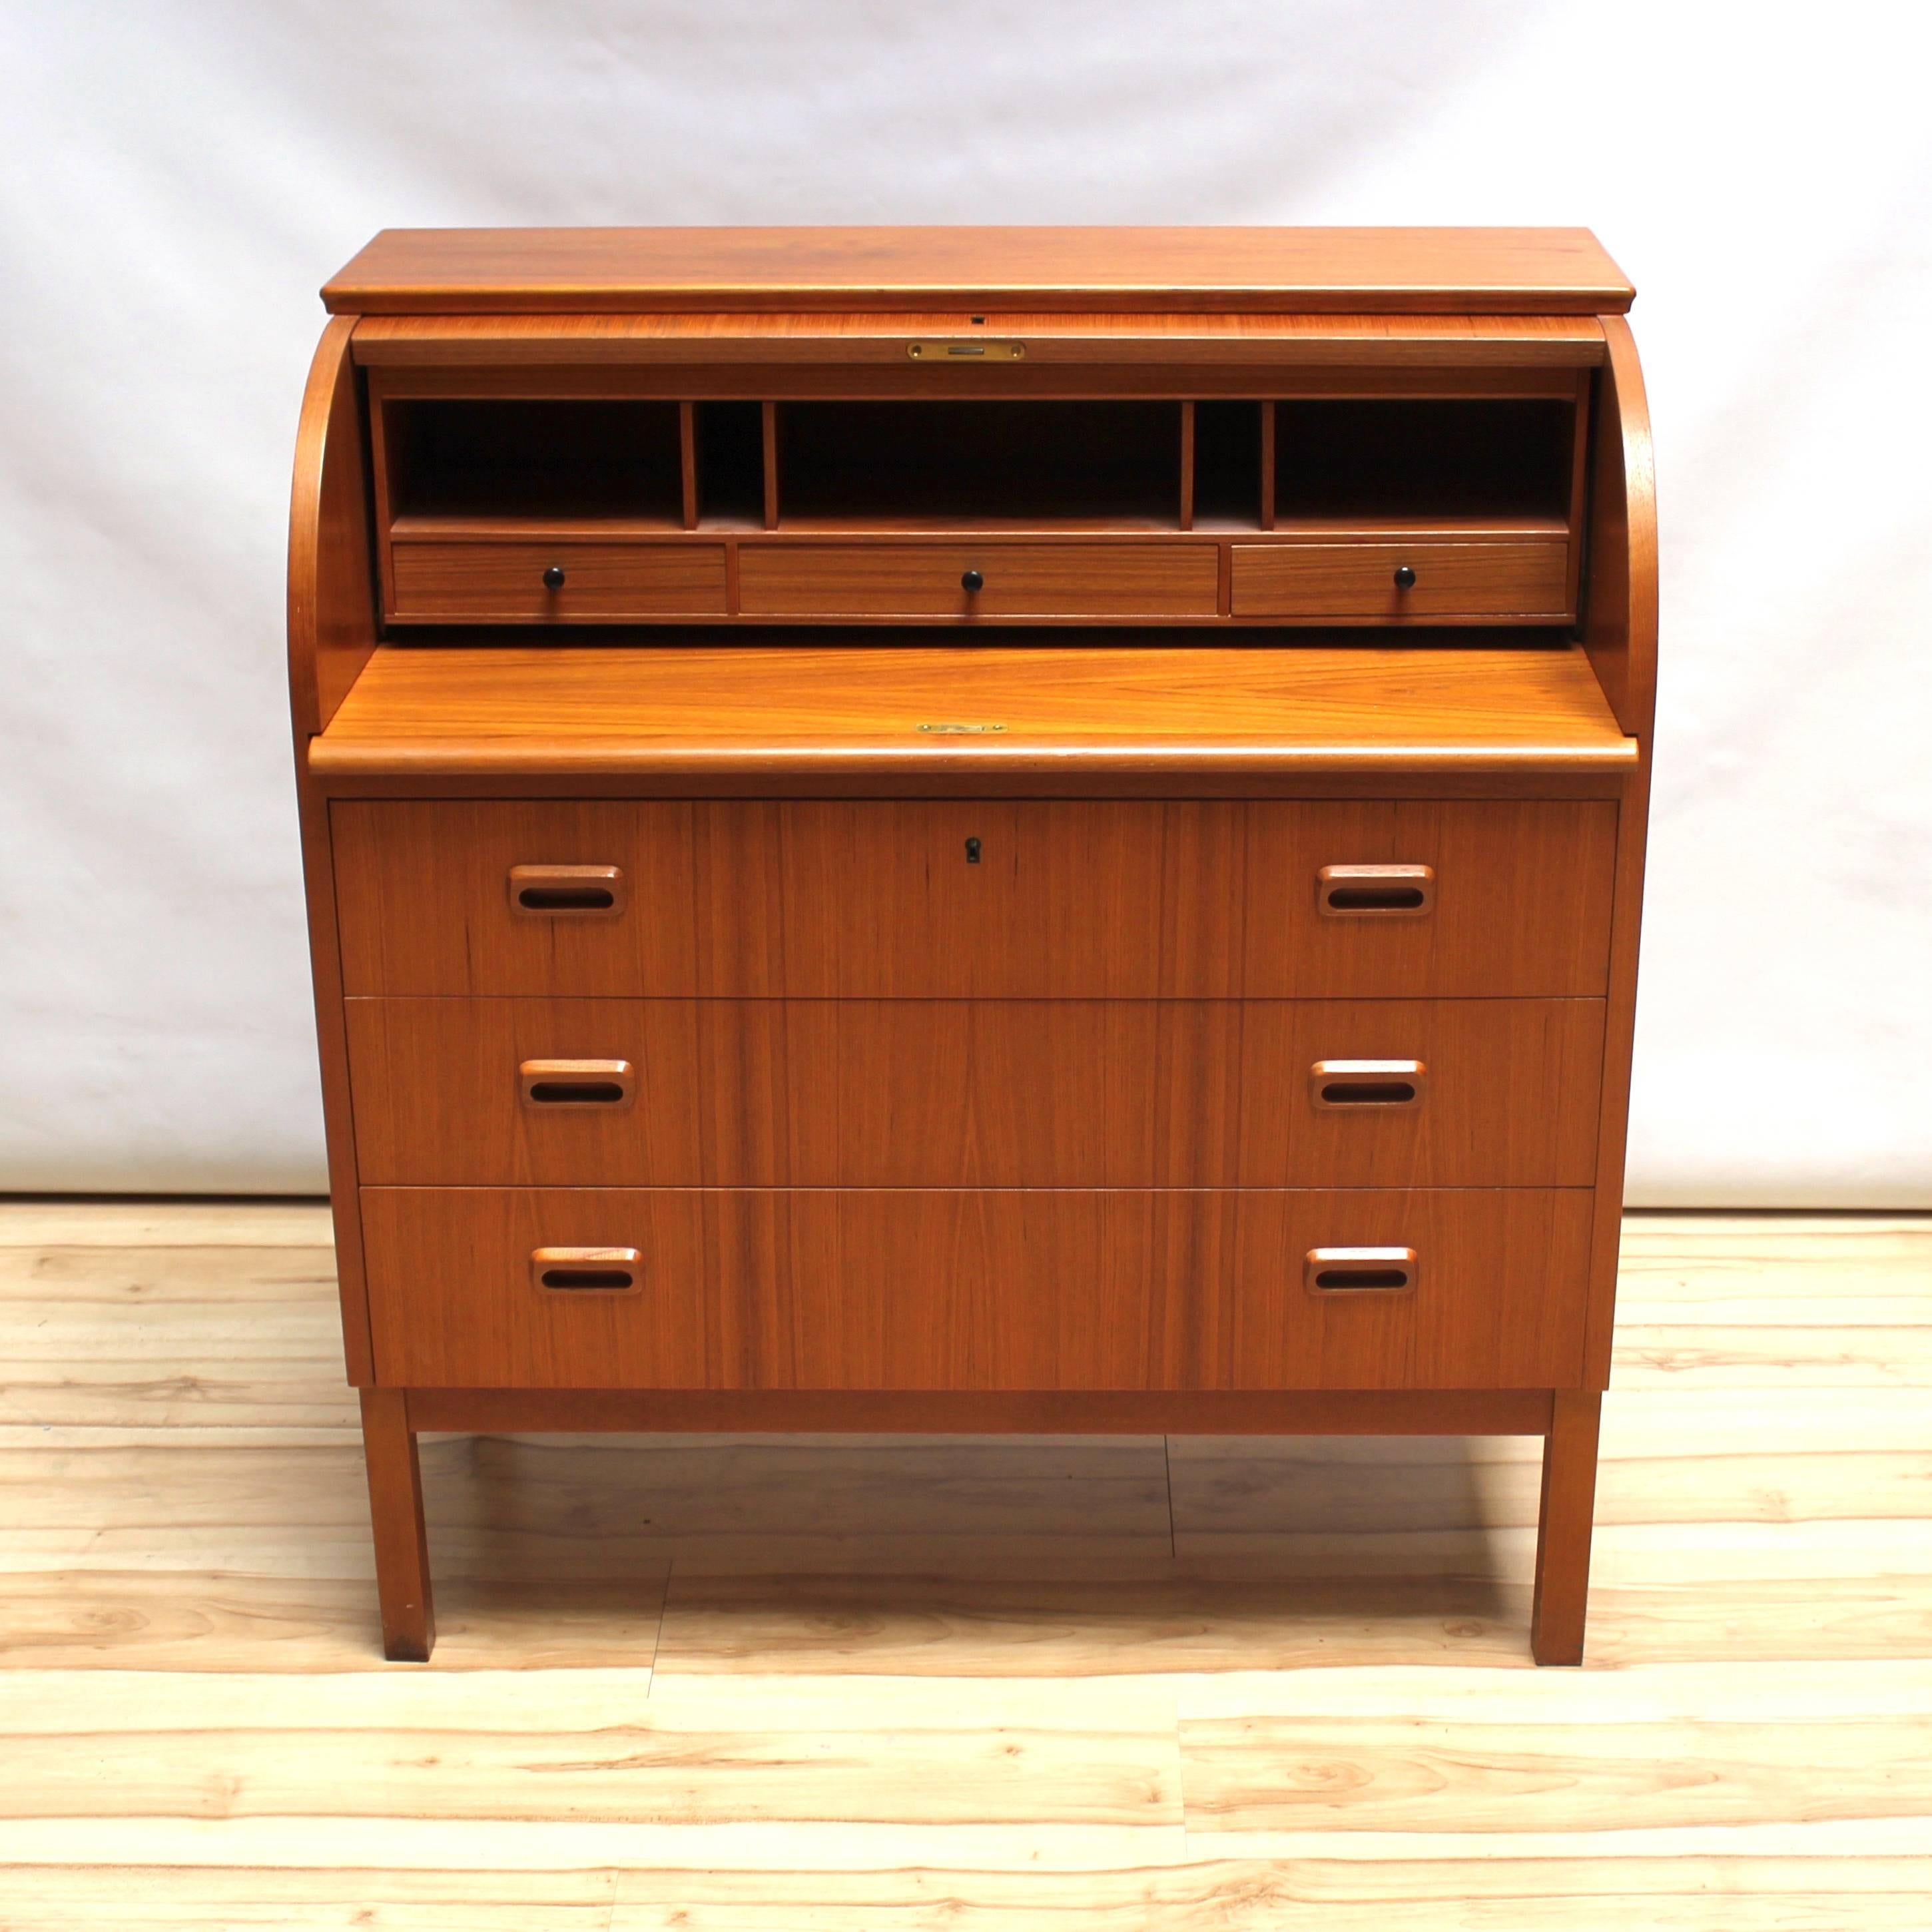 1960s Scandinavian teak secretary desk, made in Sweden. The desk has three drawers, a locking roll top front, and an extendable writing surface, as well as smaller drawers and slots for organizing. In excellent condition, with a some evidence of sun